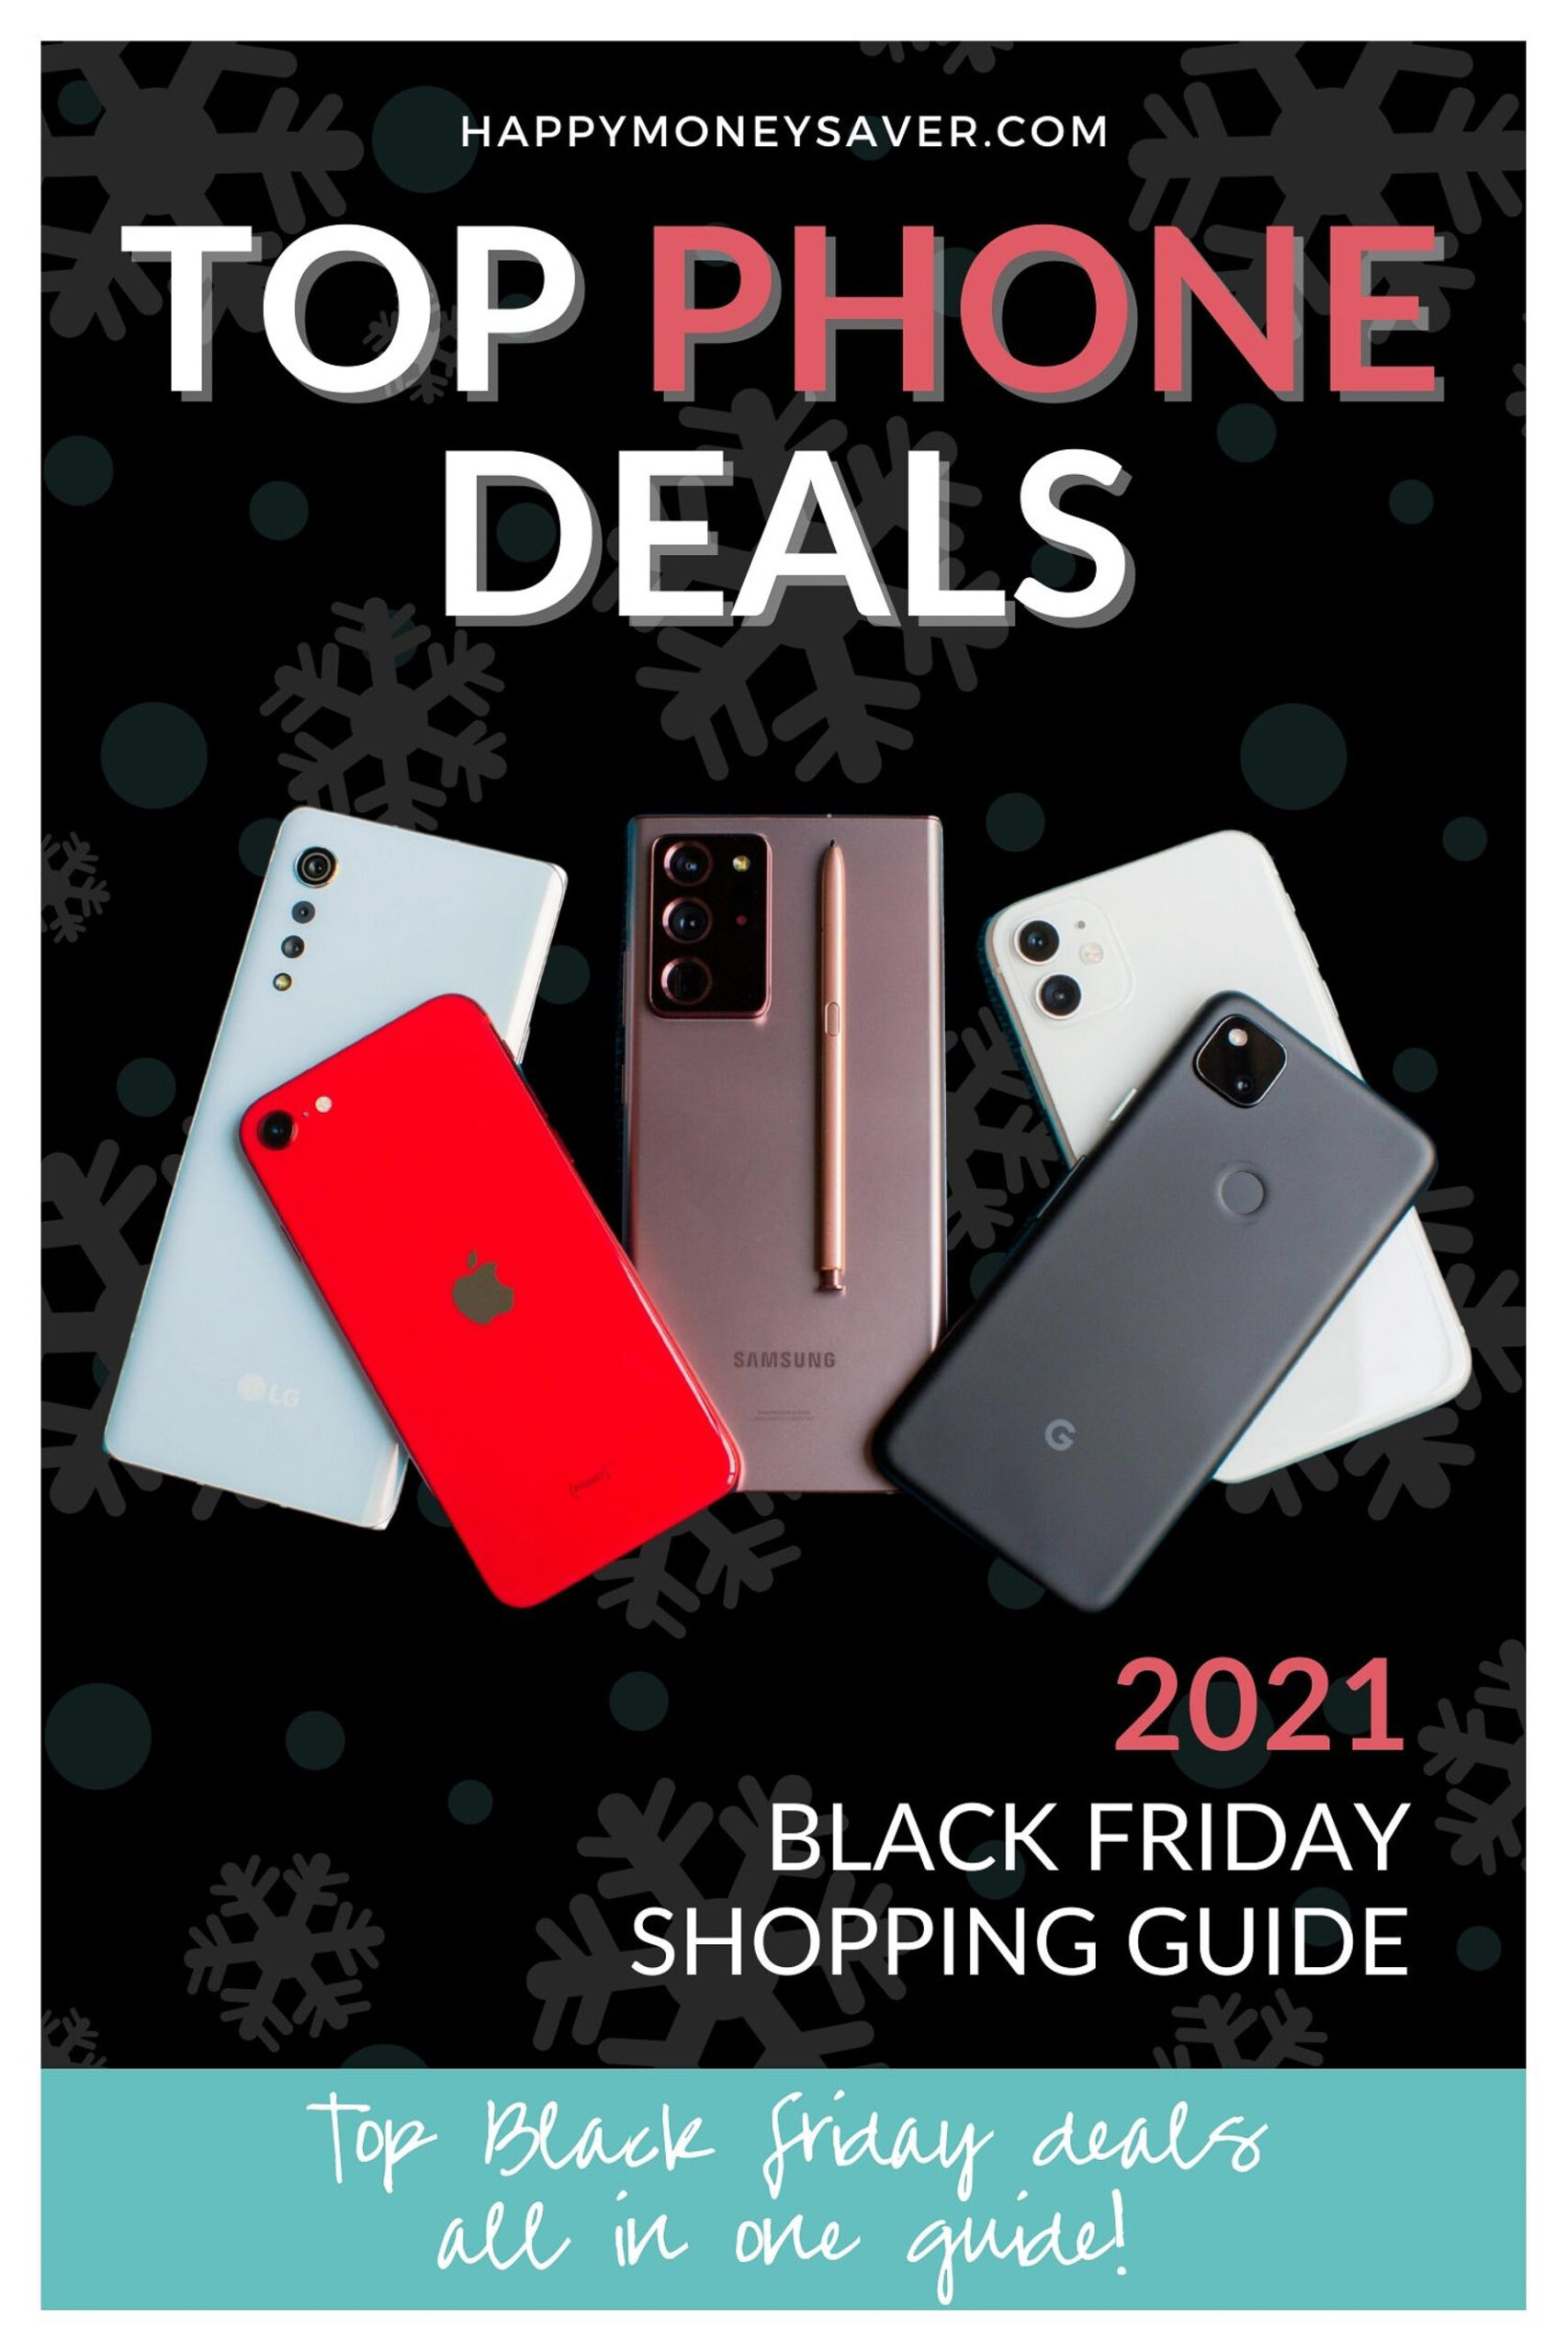 Top Black Friday PHONE Deals for 2021 Happy Money Saver